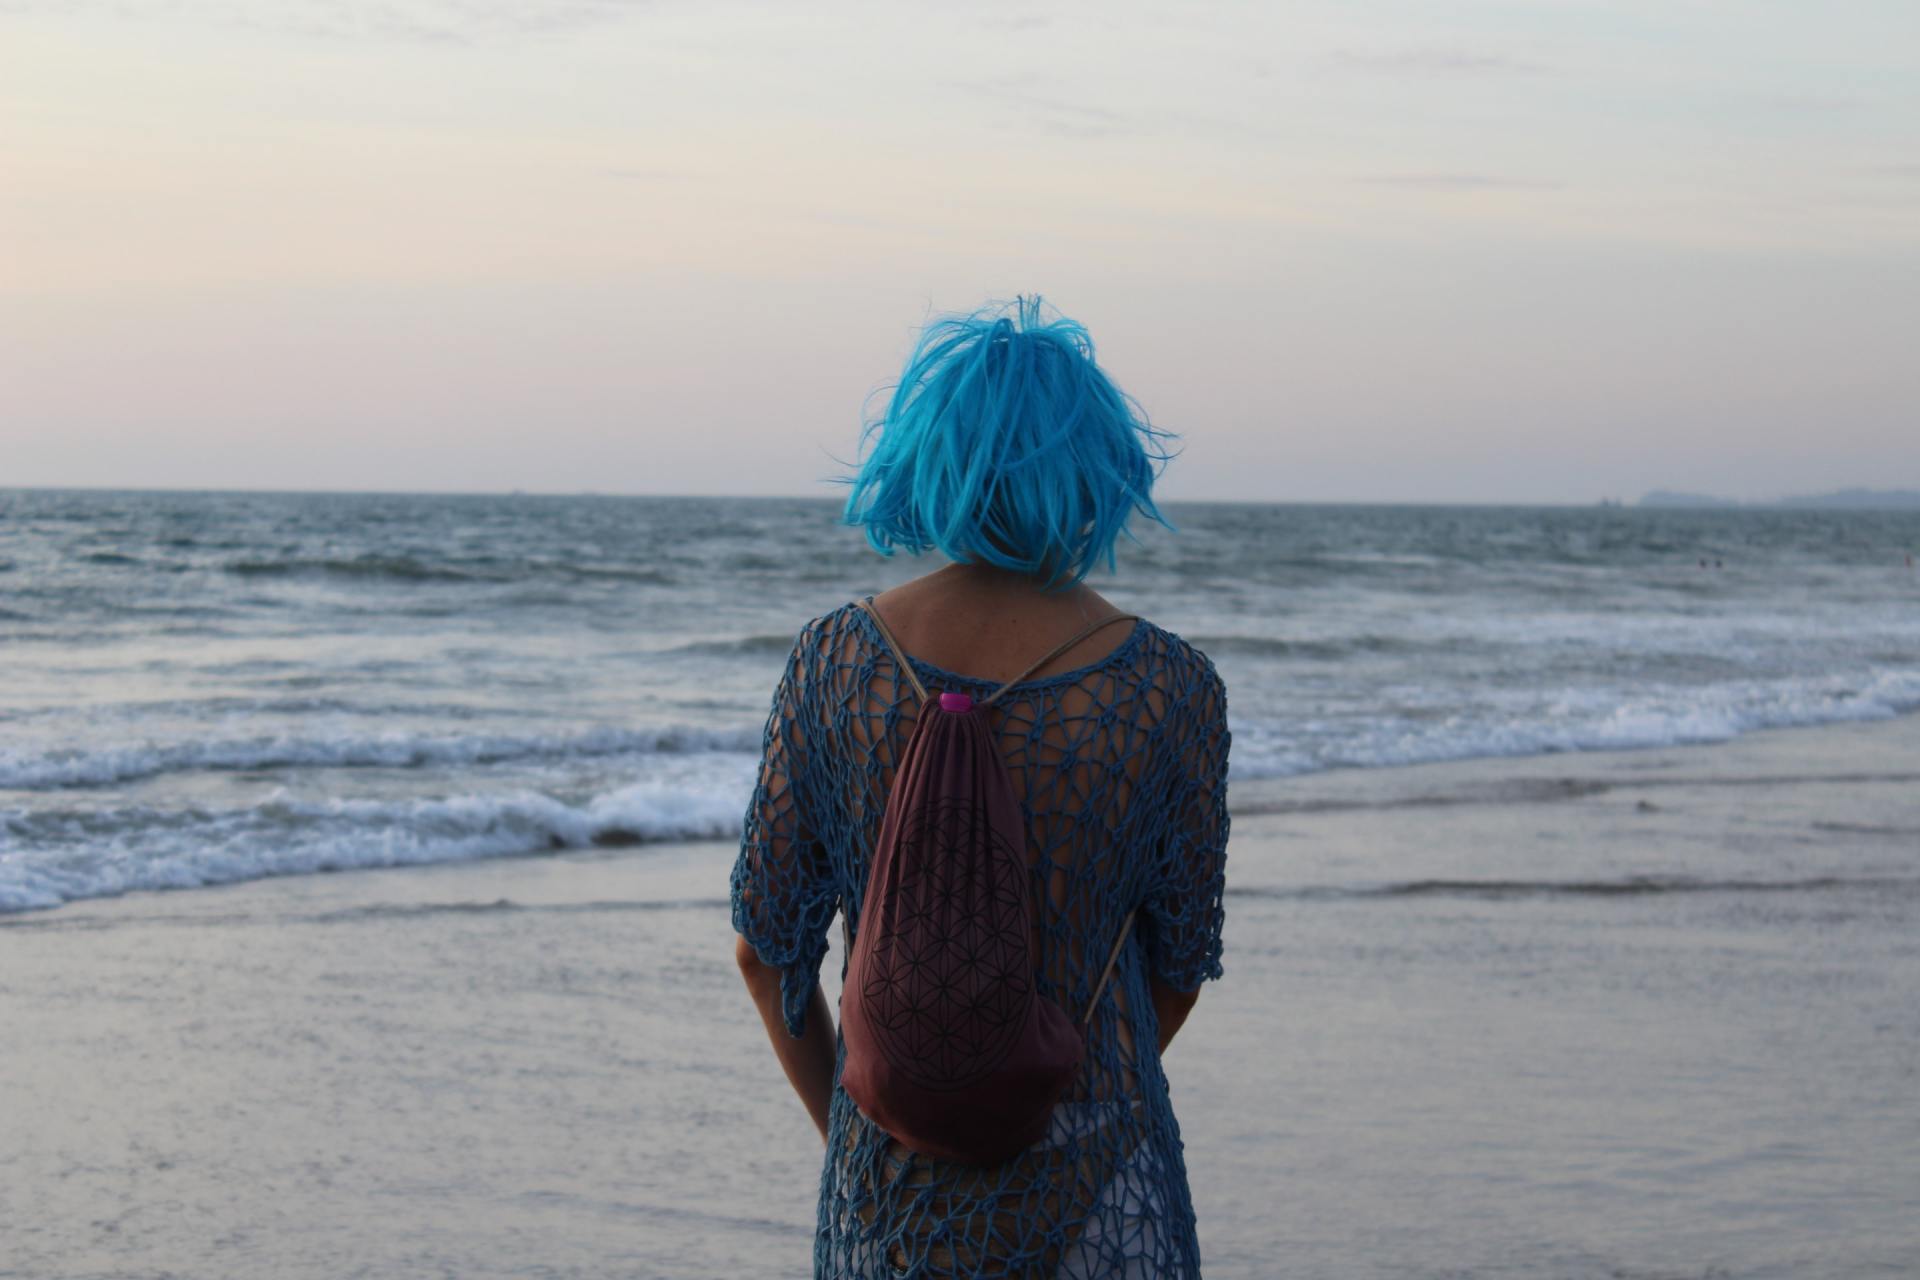 A young girl with blue hair on the beach